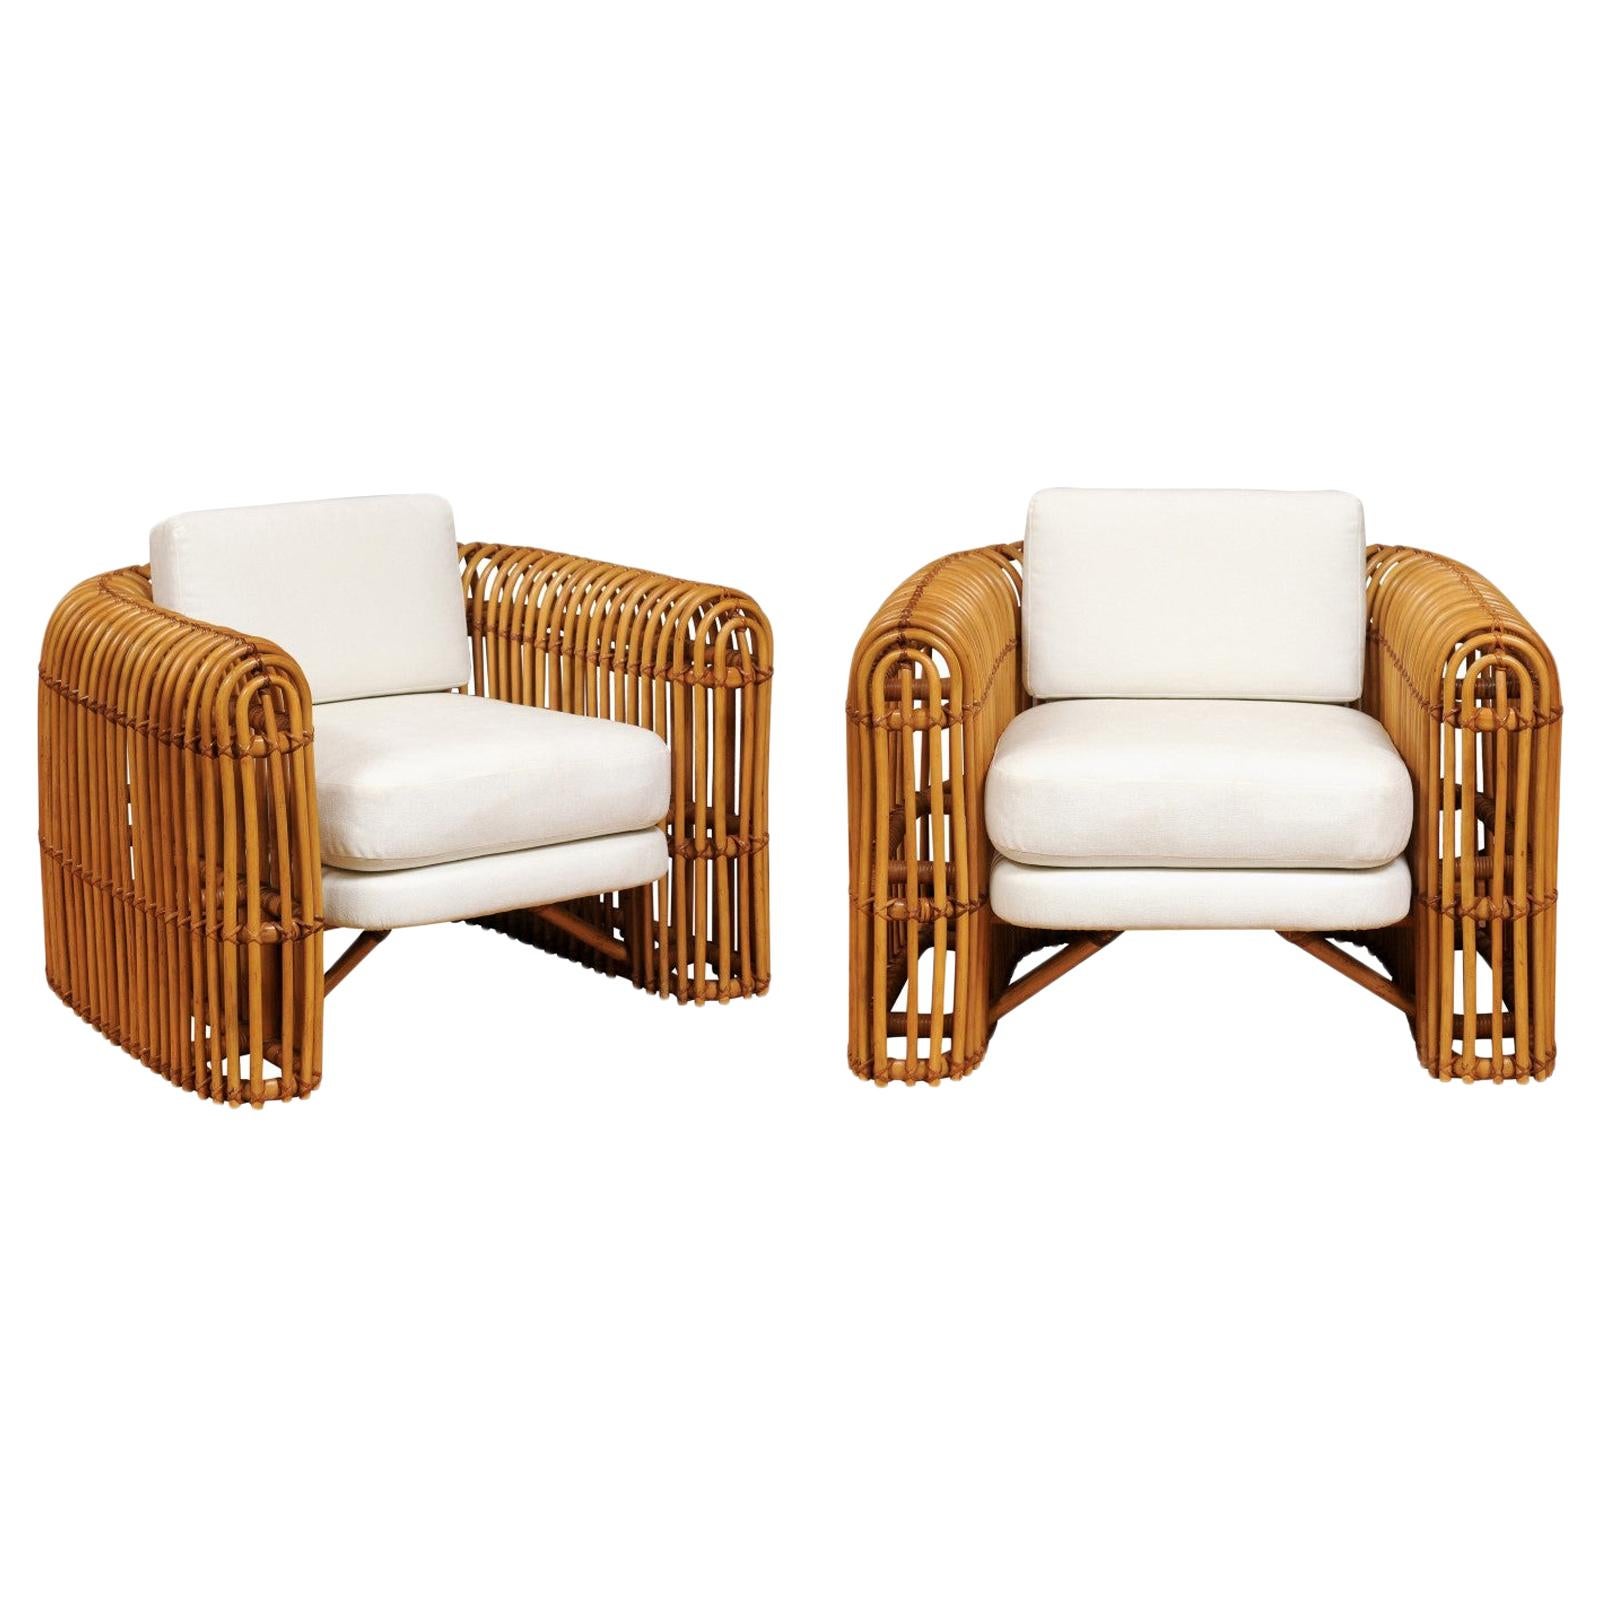 Brilliant Pair of Rattan and Cane Rib Series Club Chairs by Henry Olko, 1978